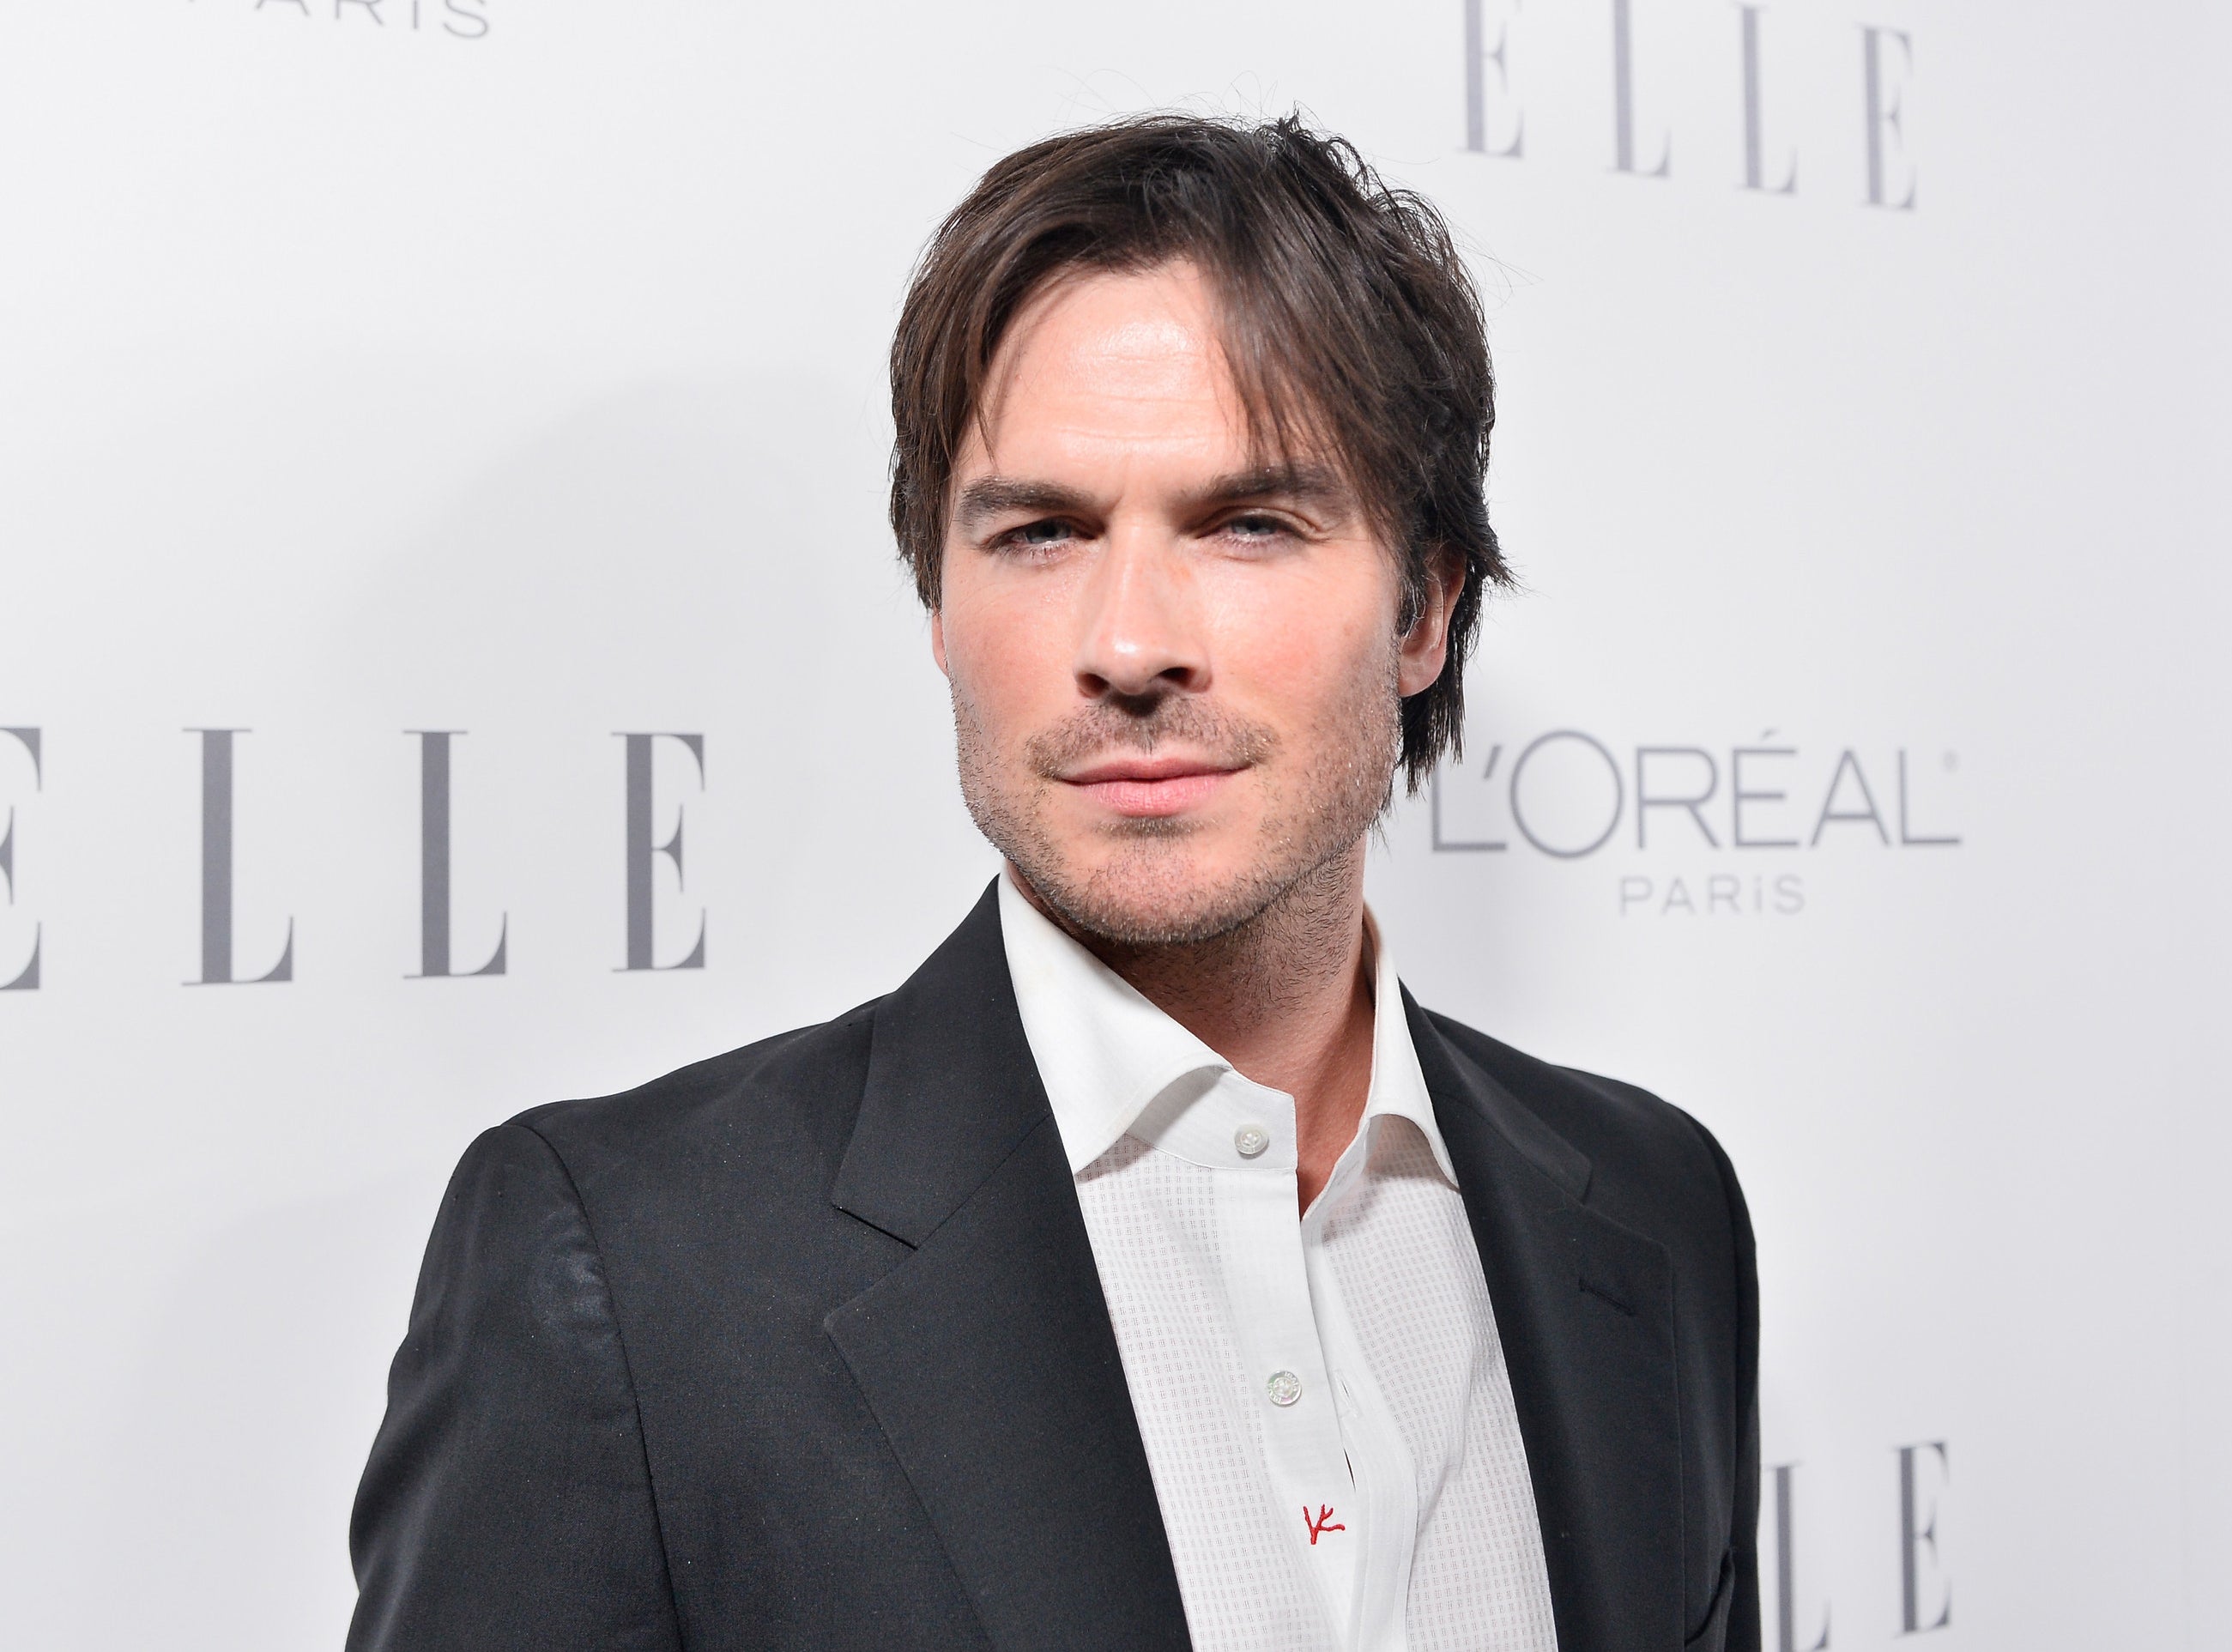 Ian looks serious at an event